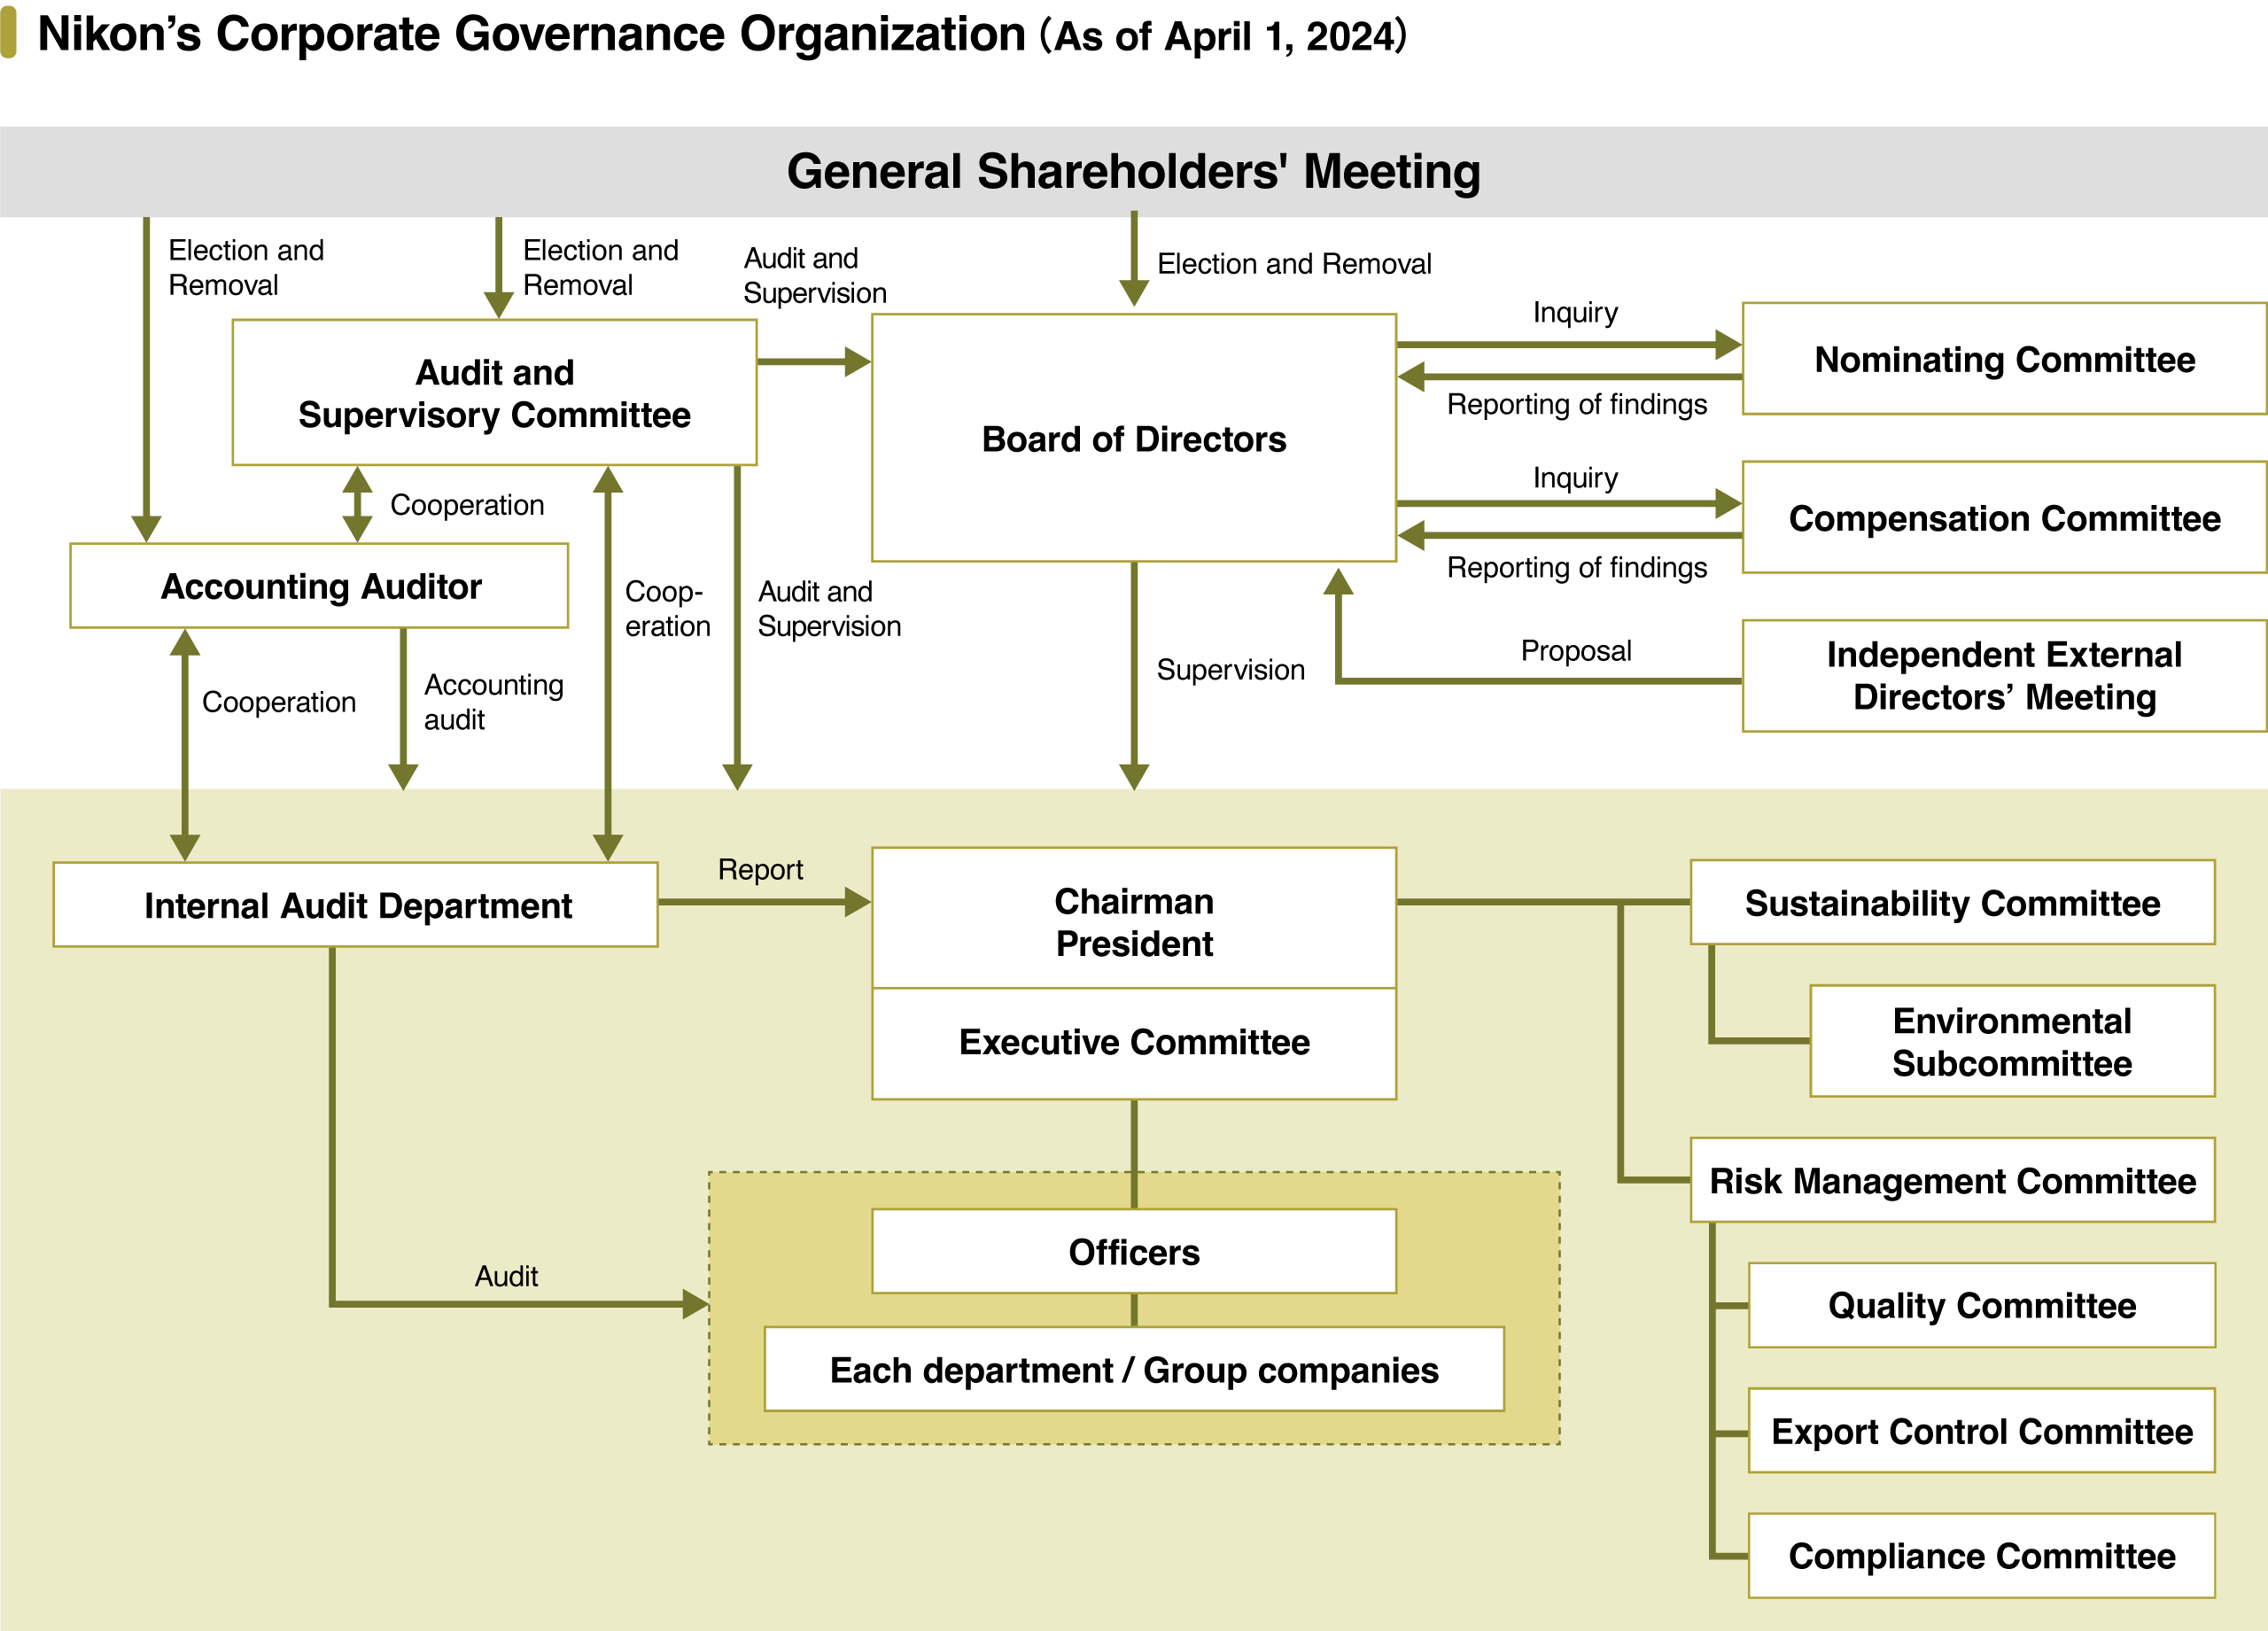 Nikon's Corporate Governance Organization System (as of October 7, 2022): The General Shareholders' Meeting elects and removes directors, Audit and Supervisory Committee members, and the Accounting Auditor. The Board of Directors submits inquiries to the Nominating Committee and the Compensation Committee, and they report their findings to the Board of Directors. The Independent External Directors' Meeting submits proposals to the Board of Directors. The Board of Directors also supervises the Executive Committee and various other committees etc., including the Sustainability Committee. The Audit and Supervisory Committee audits and supervises the Board of Directors, the Executive Committee and various other committees etc., including the Sustainability Committee, and cooperates with the Accounting Auditor and the Internal Audit Department. The Accounting Auditor audits the Executive Committee and various other committees etc., including the Sustainability Committee, and cooperates with the Internal Audit Department. The Internal Audit Department reports to the President and Executive Committee, and audits officers and departments/group companies. The Sustainability Committee and the Risk Management Committee are under the control of the President, and the Environmental Subcommittee is under the control of the Sustainability Committee. The Quality Committee, Export Control Committee and Compliance Committee are under the control of the Risk Management Committee.